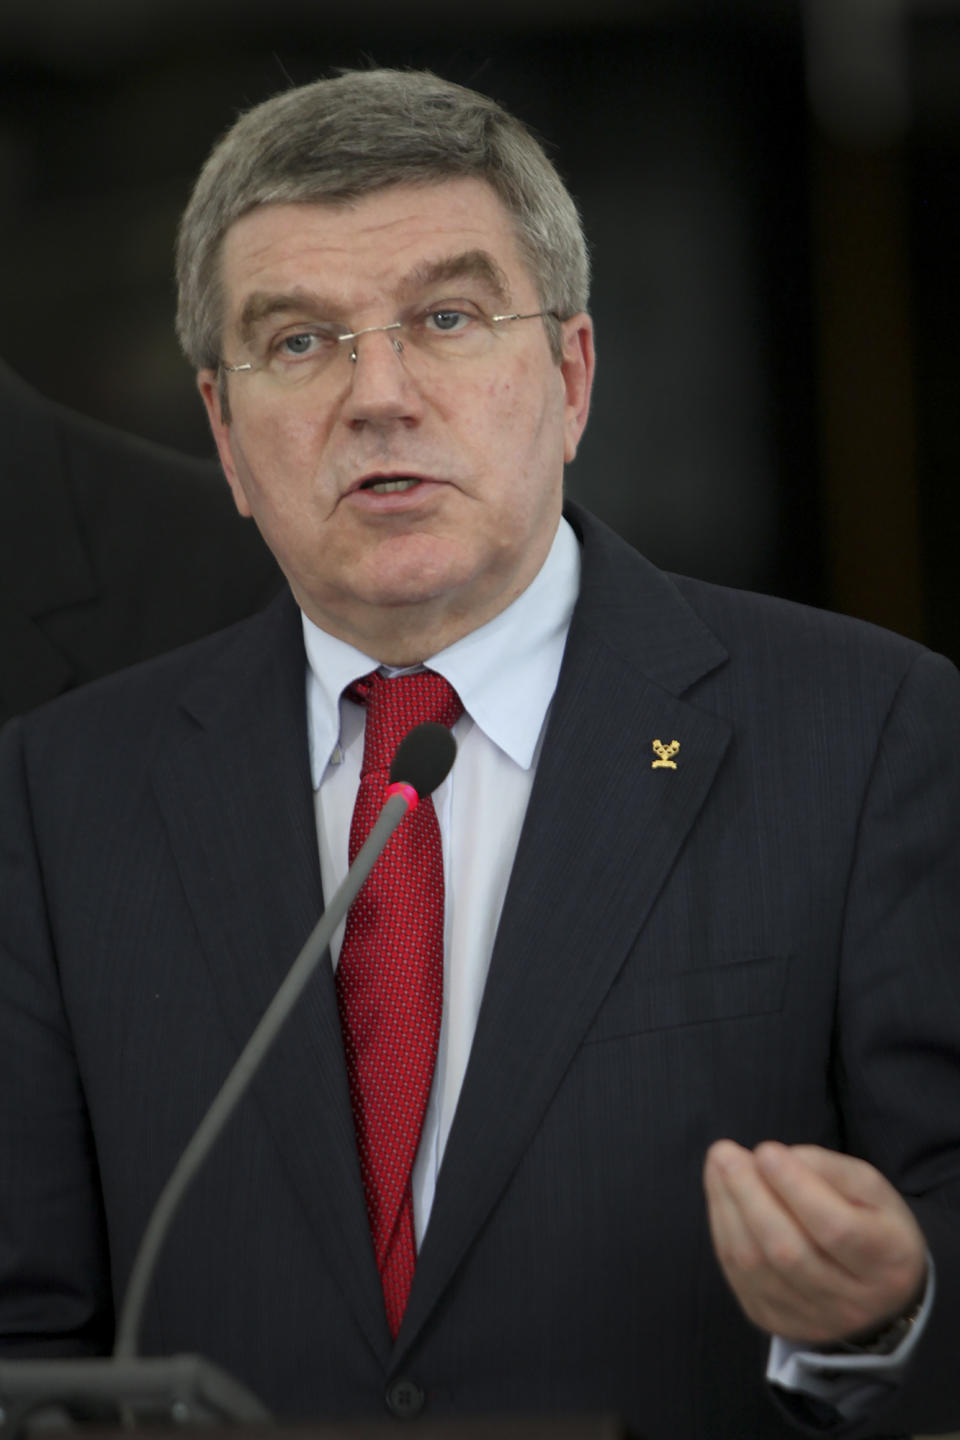 International Olympic Committee (IOC) President Thomas Bach speaks during a news conference after a meeting with Brazil's President Dilma Rousseff at Planalto palace in Brasilia, Brazil, Tuesday, Jan. 21, 2014. The city of Rio de Janeiro will host the Olympics in 2016. (AP Photo/Joel Rodrigues)